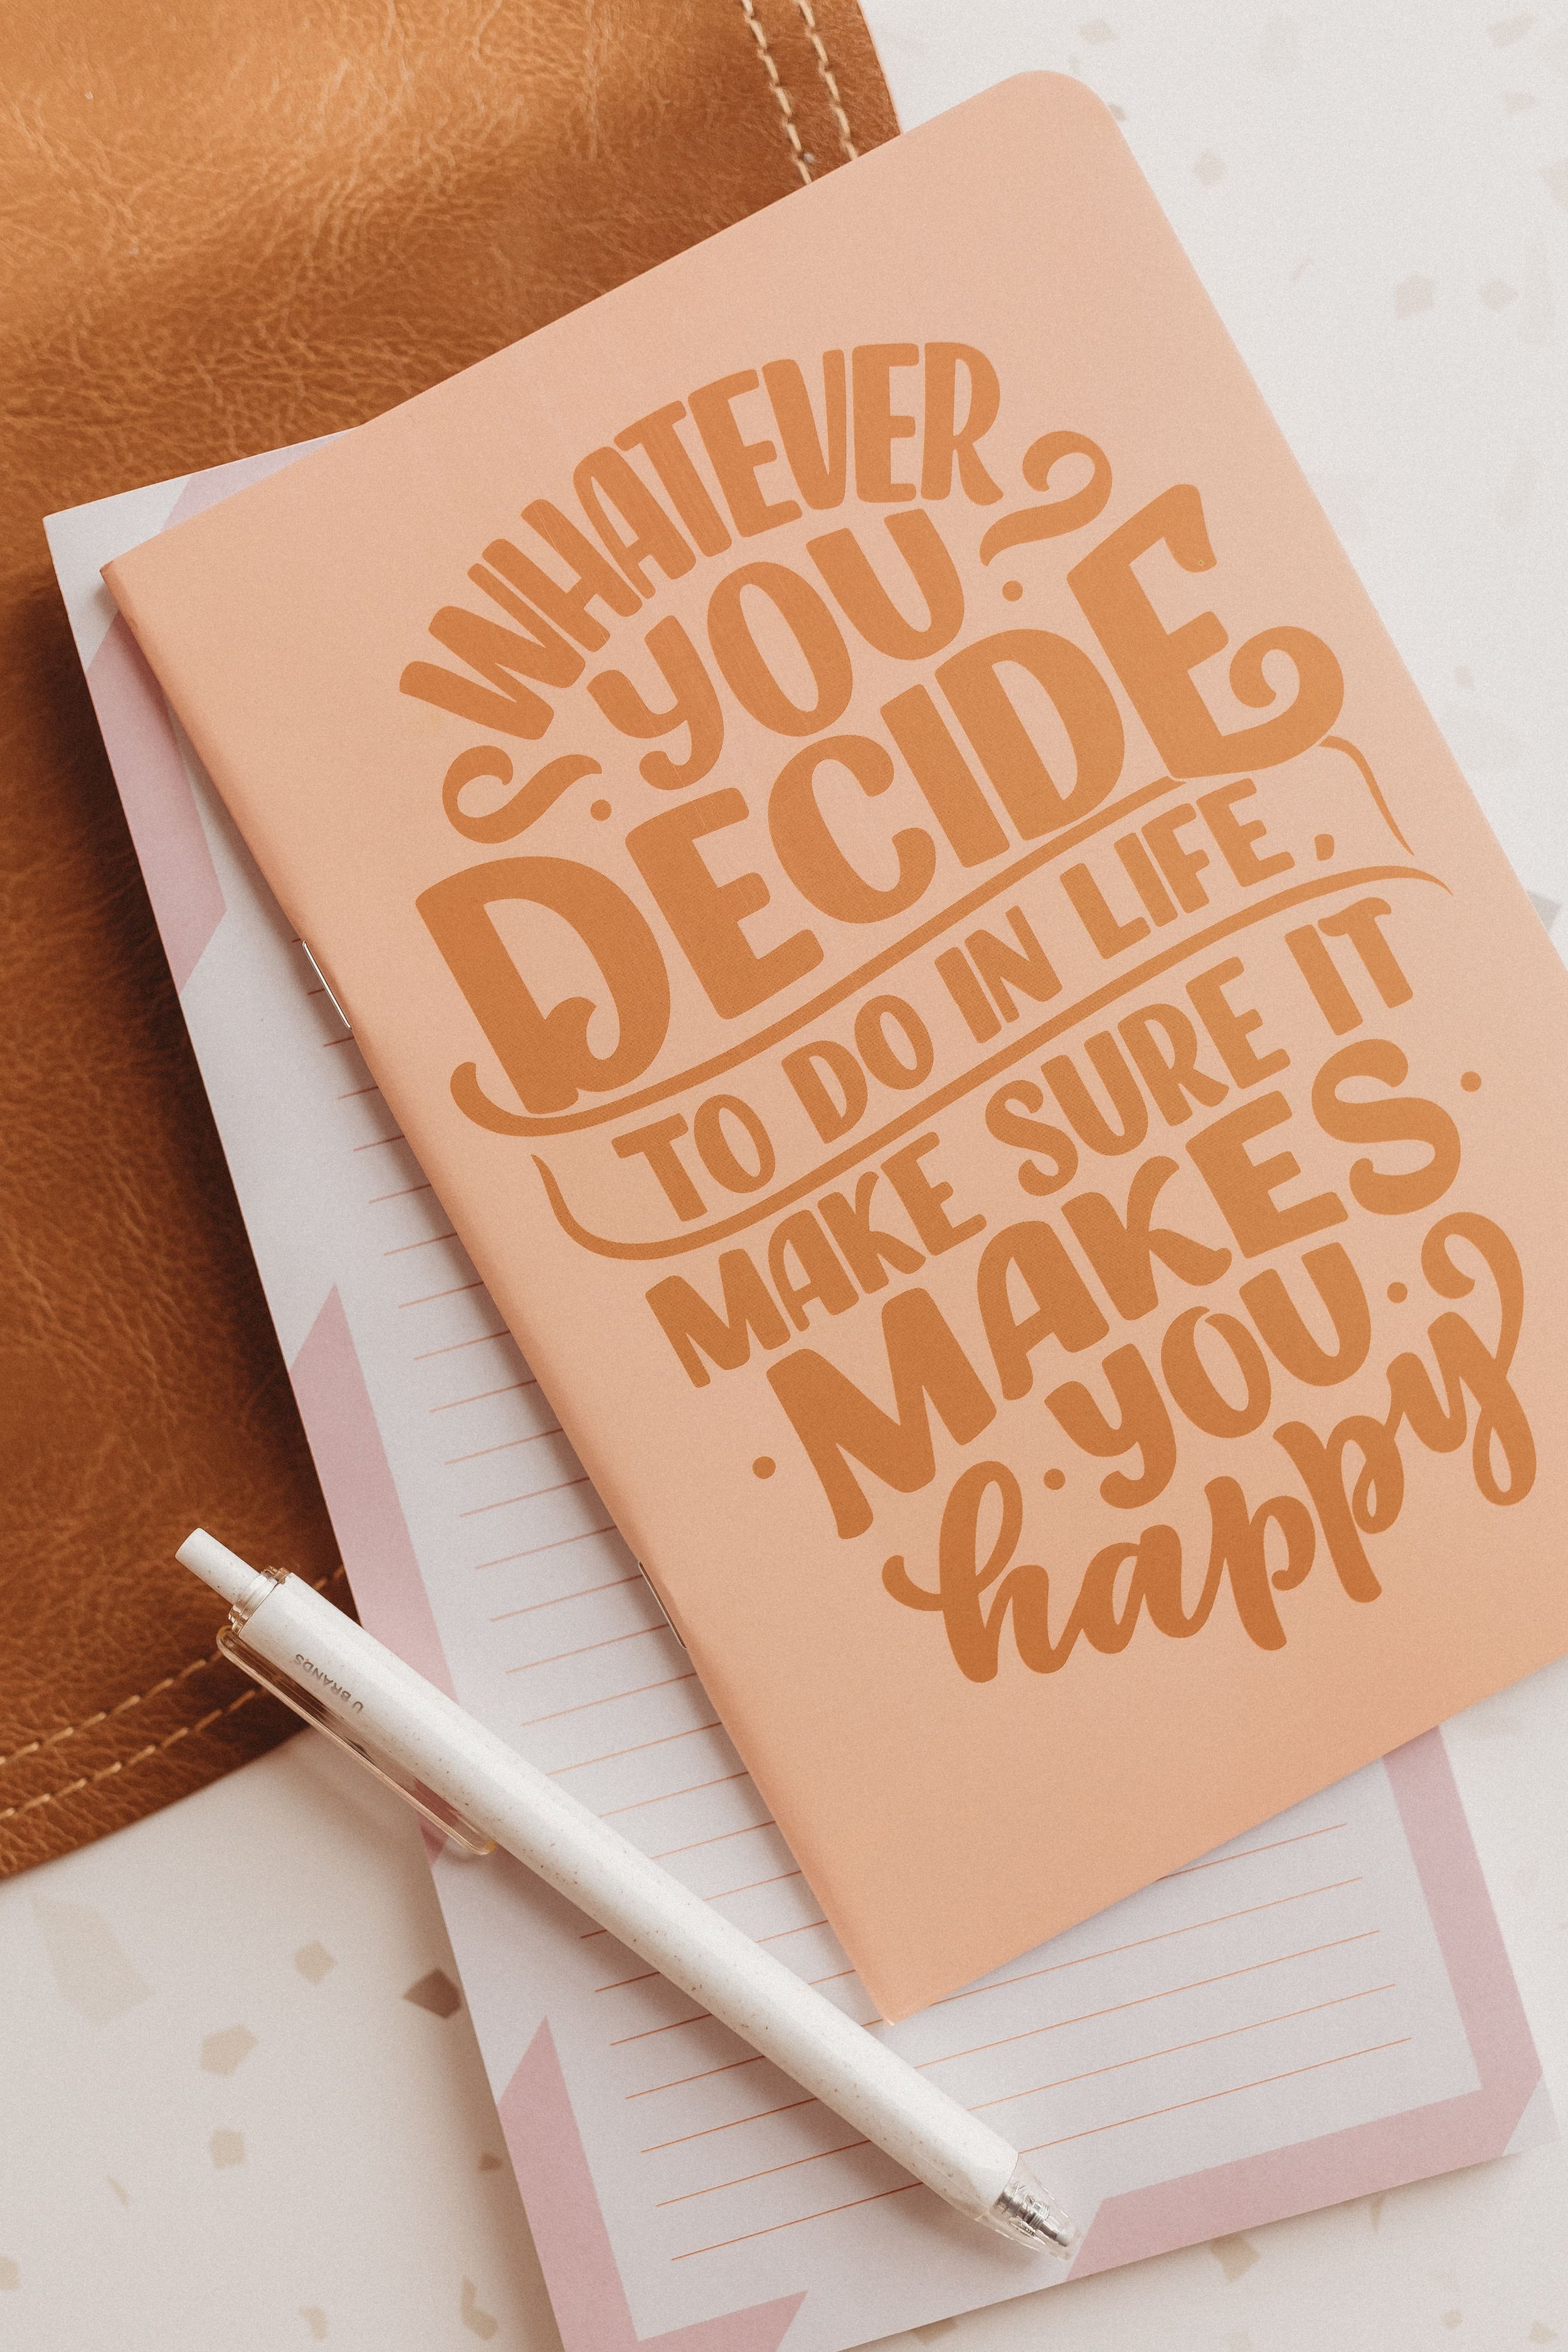  a notebook that says “whatever you decide to do in life, make sure it makes you happy” 